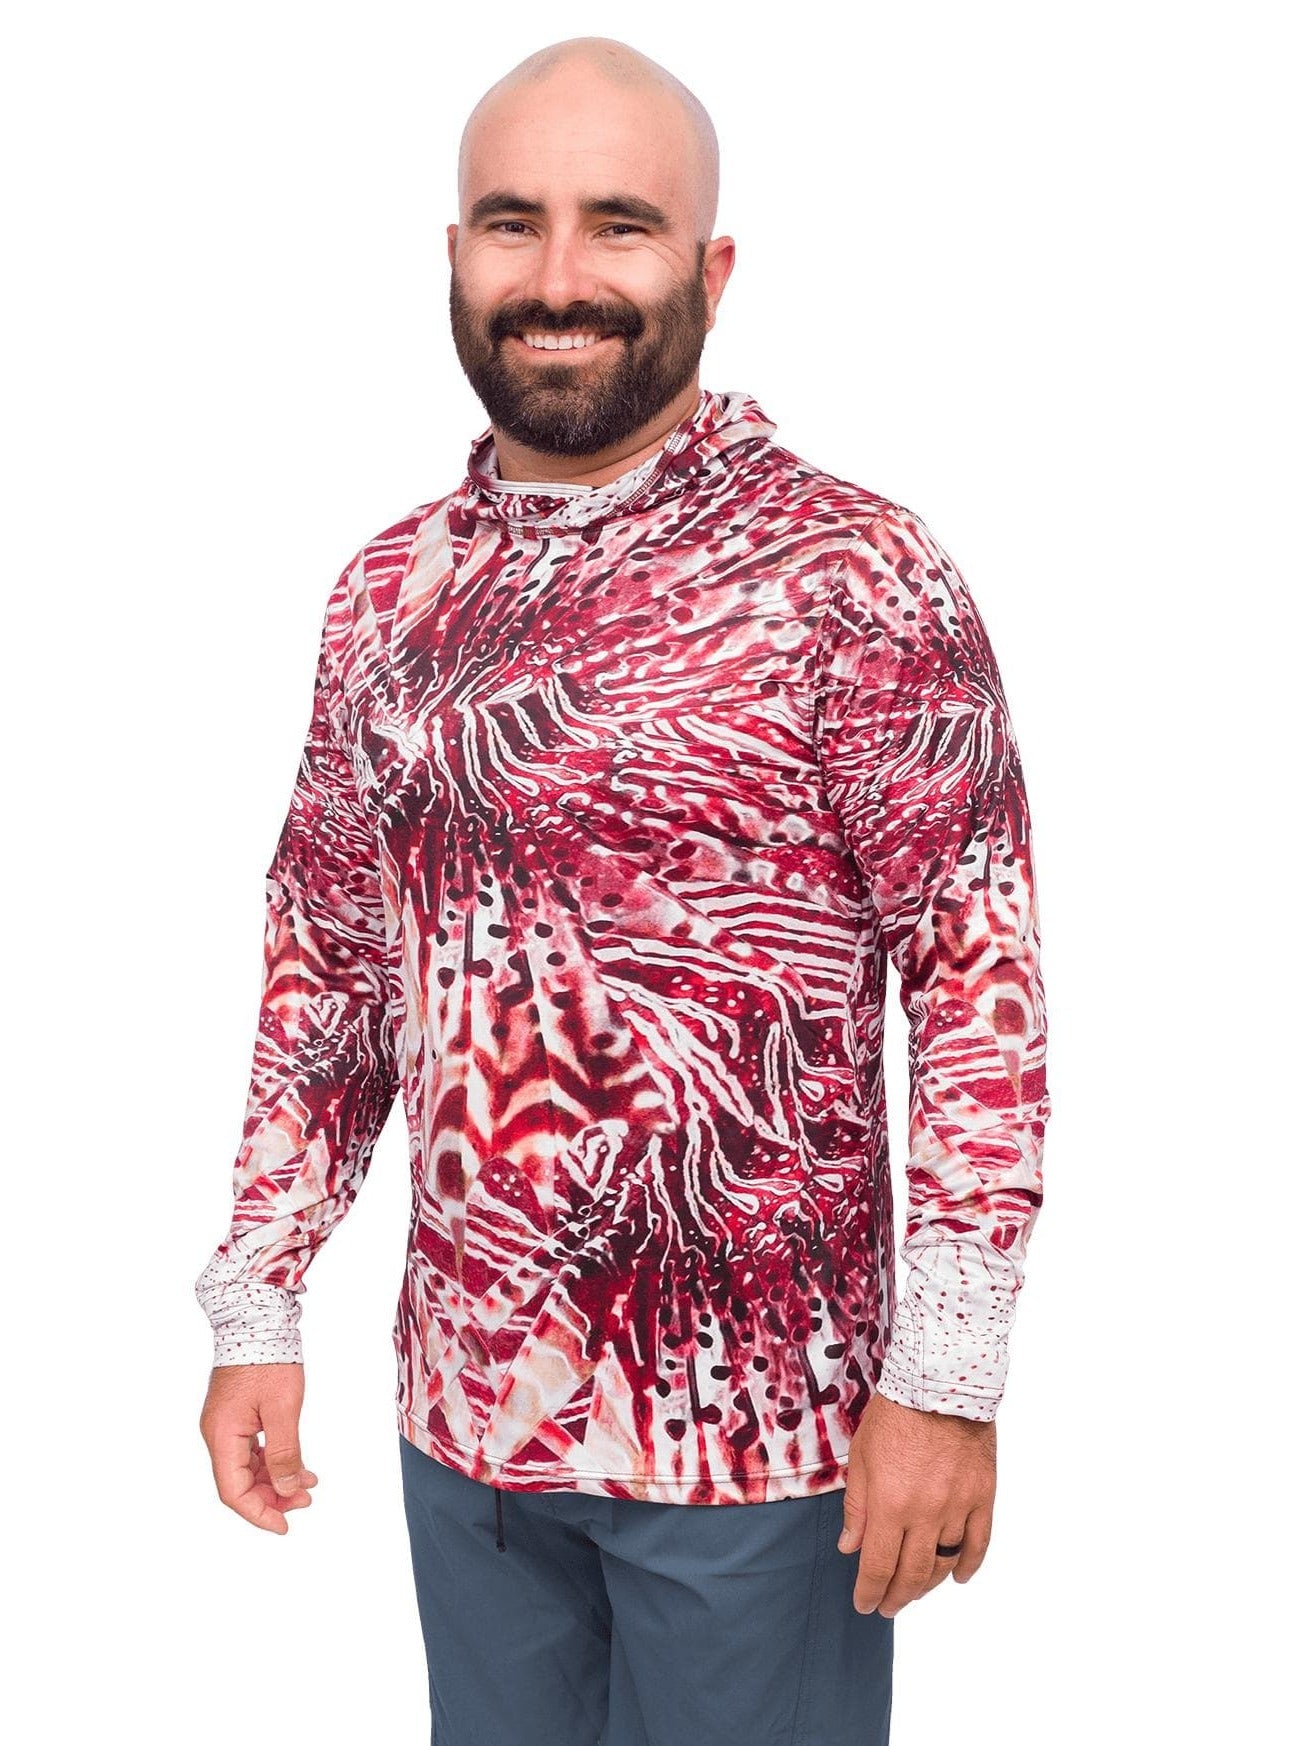 Lionfish Printed Sun Shirt | Swim | Dive Skin | Surf | UPF 50+ | male [L] | Recycled Polyester/Spandex